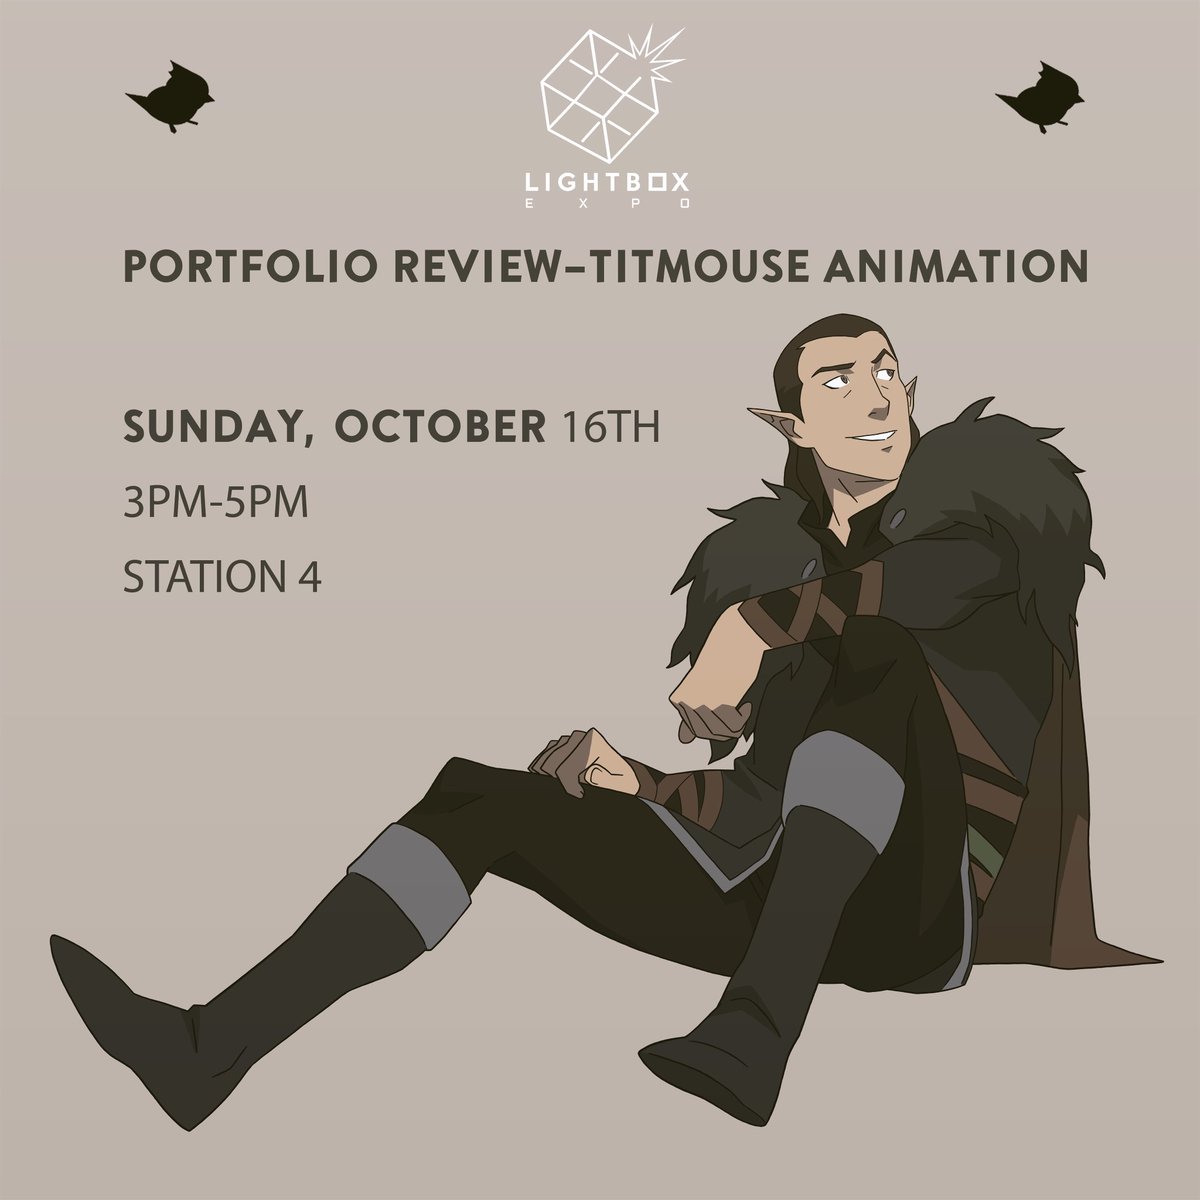 I’ll be reviewing character design portfolios on behalf of @TitmouseInc at Lightbox Expo Sunday, October 16th from 3pm-5pm at station 4. This review is specifically for Character Design portfolios only. Bring your art and please wear a mask. Hope to see you there! #lbx2022